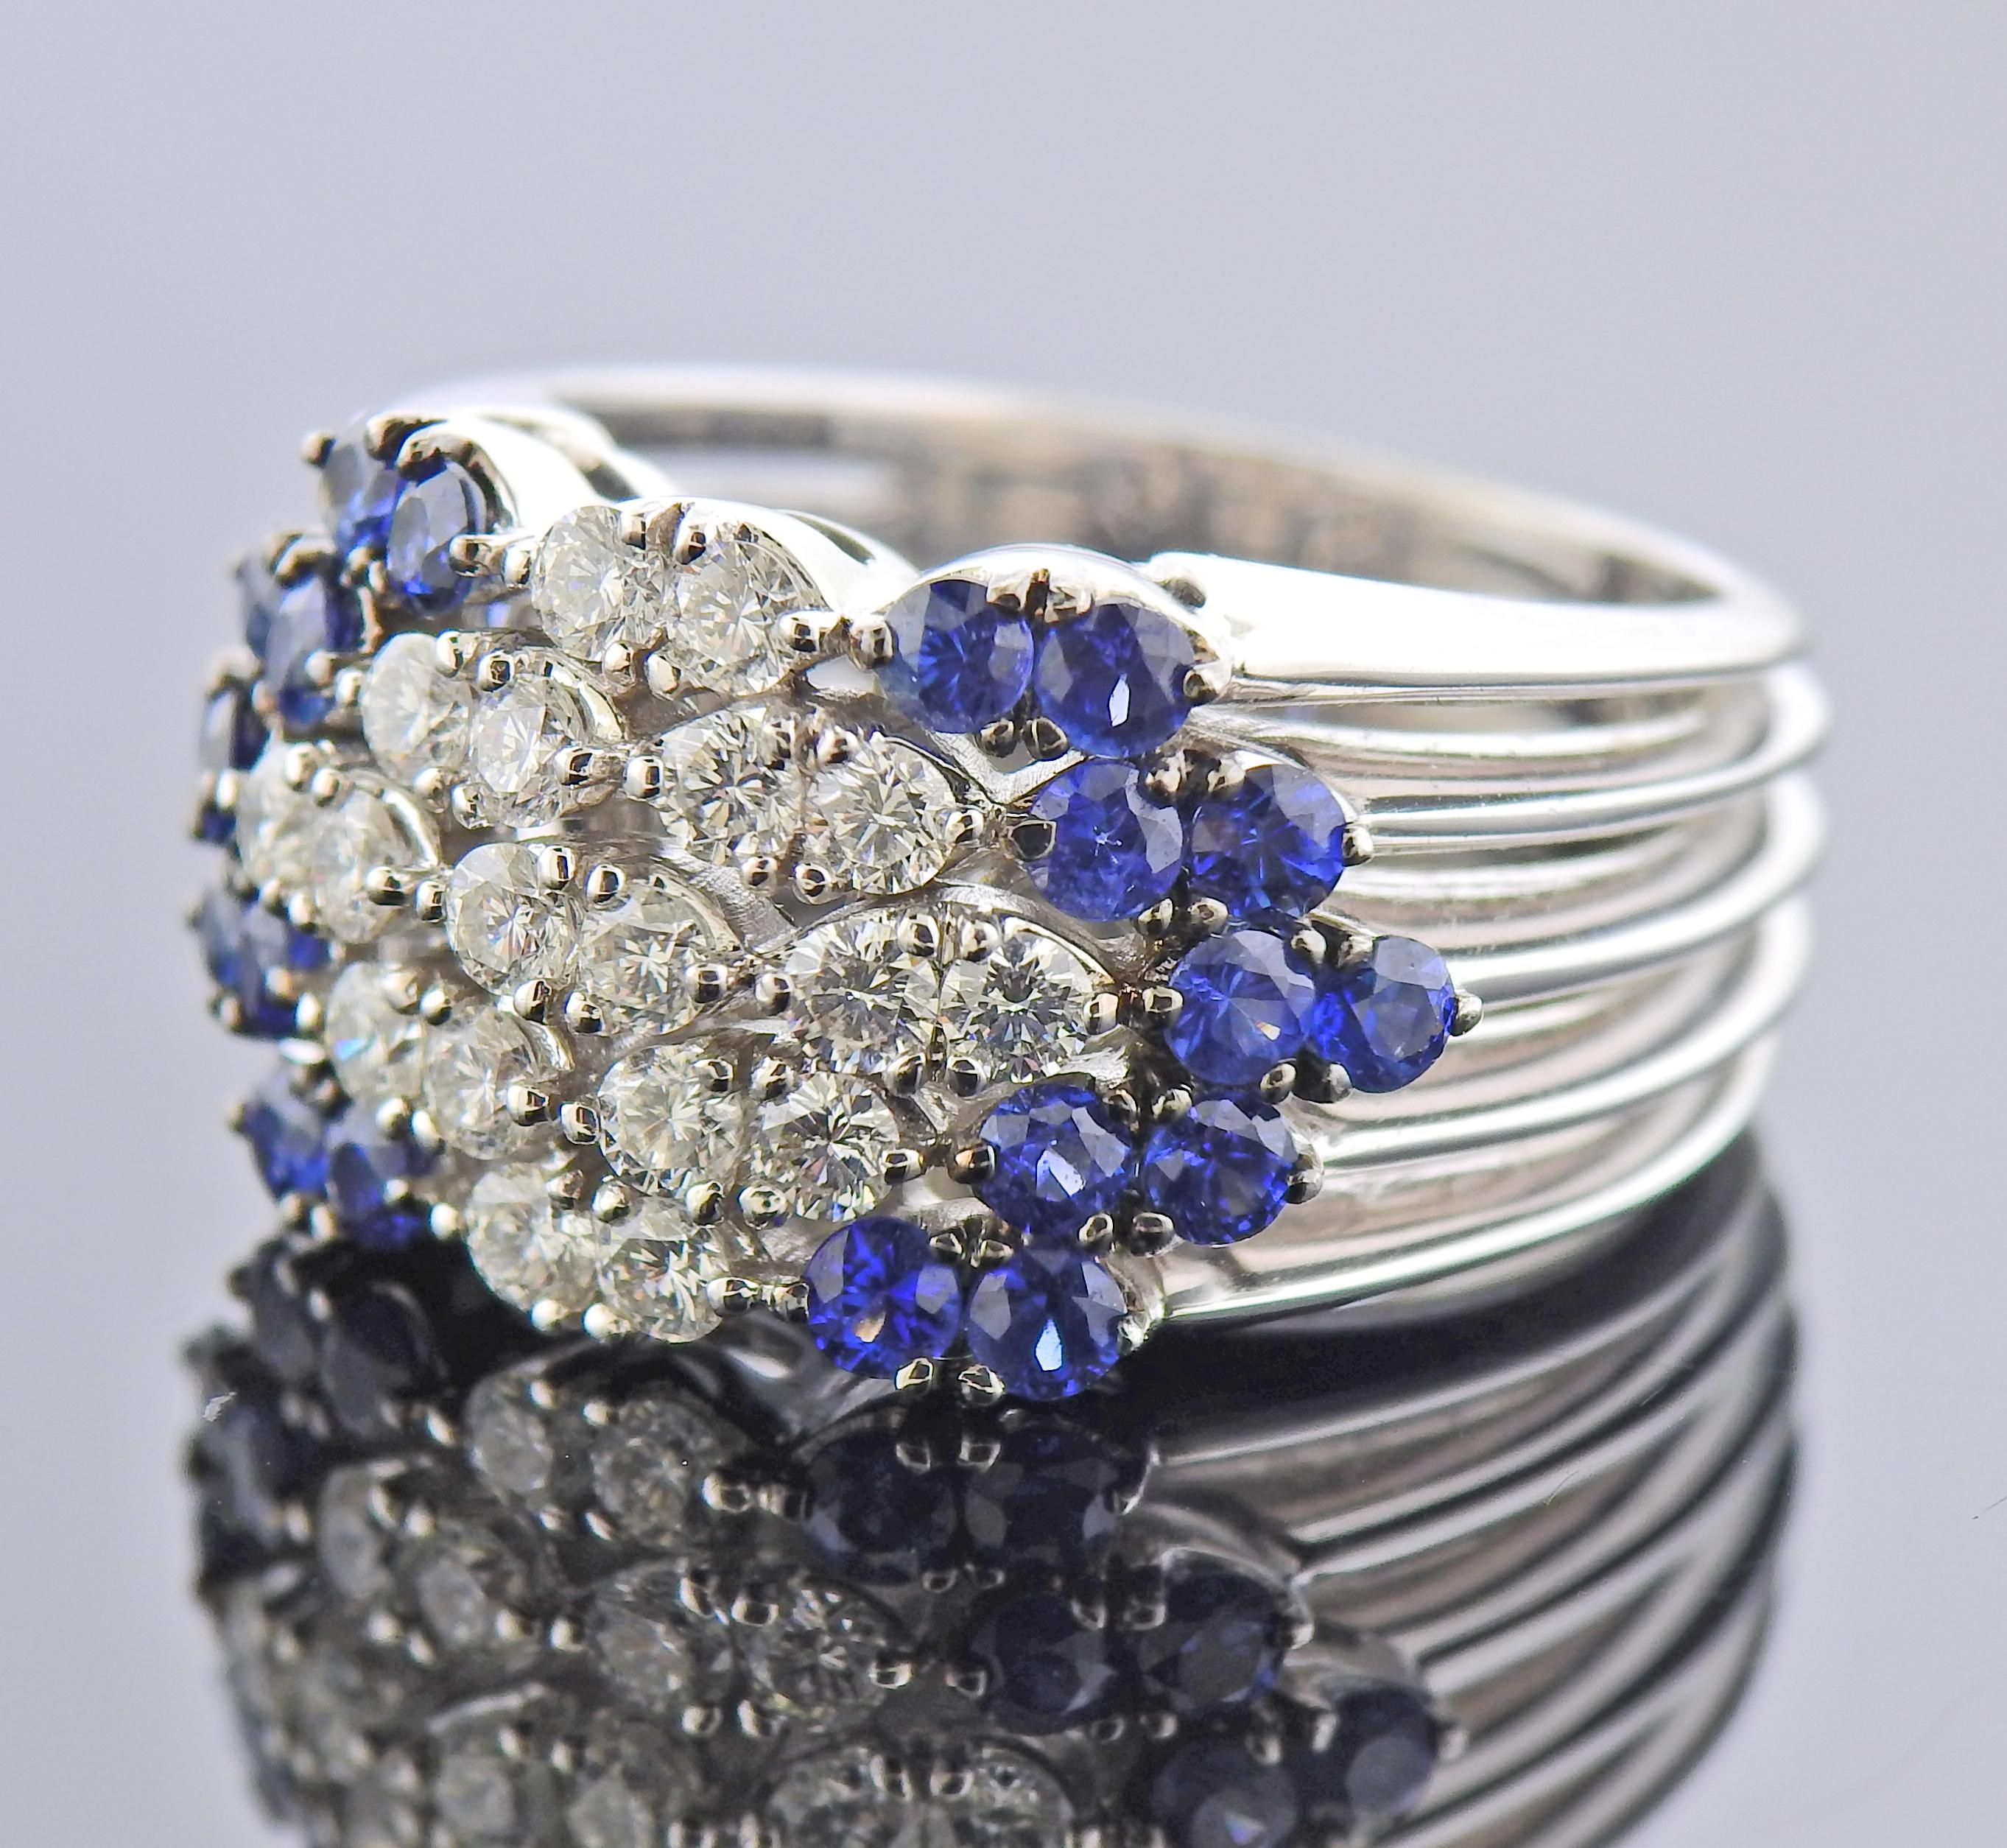 18k white gold ring, with blue sapphires and approx. 0.90ctw in diamonds. Ring size - 6.5, ring top is 14mm wide. Marked: 750, Italian mark. Weight - 14.4 grams. 